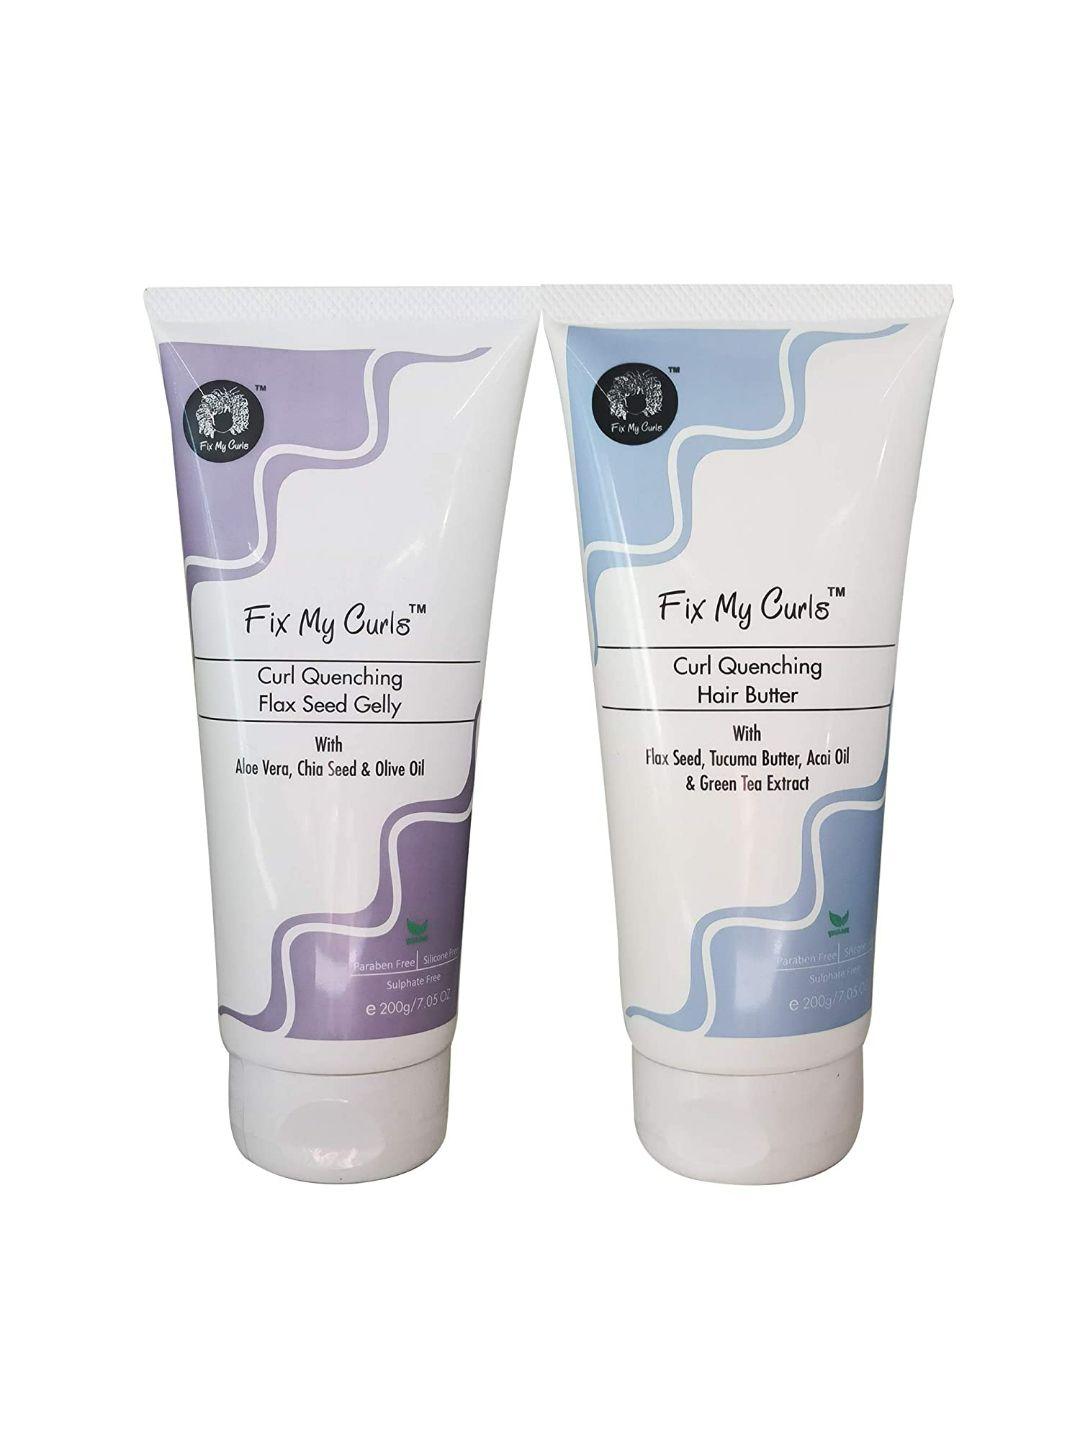 fix my curls set of 2 moisture styling curl quenching creame for curly and wavy hair